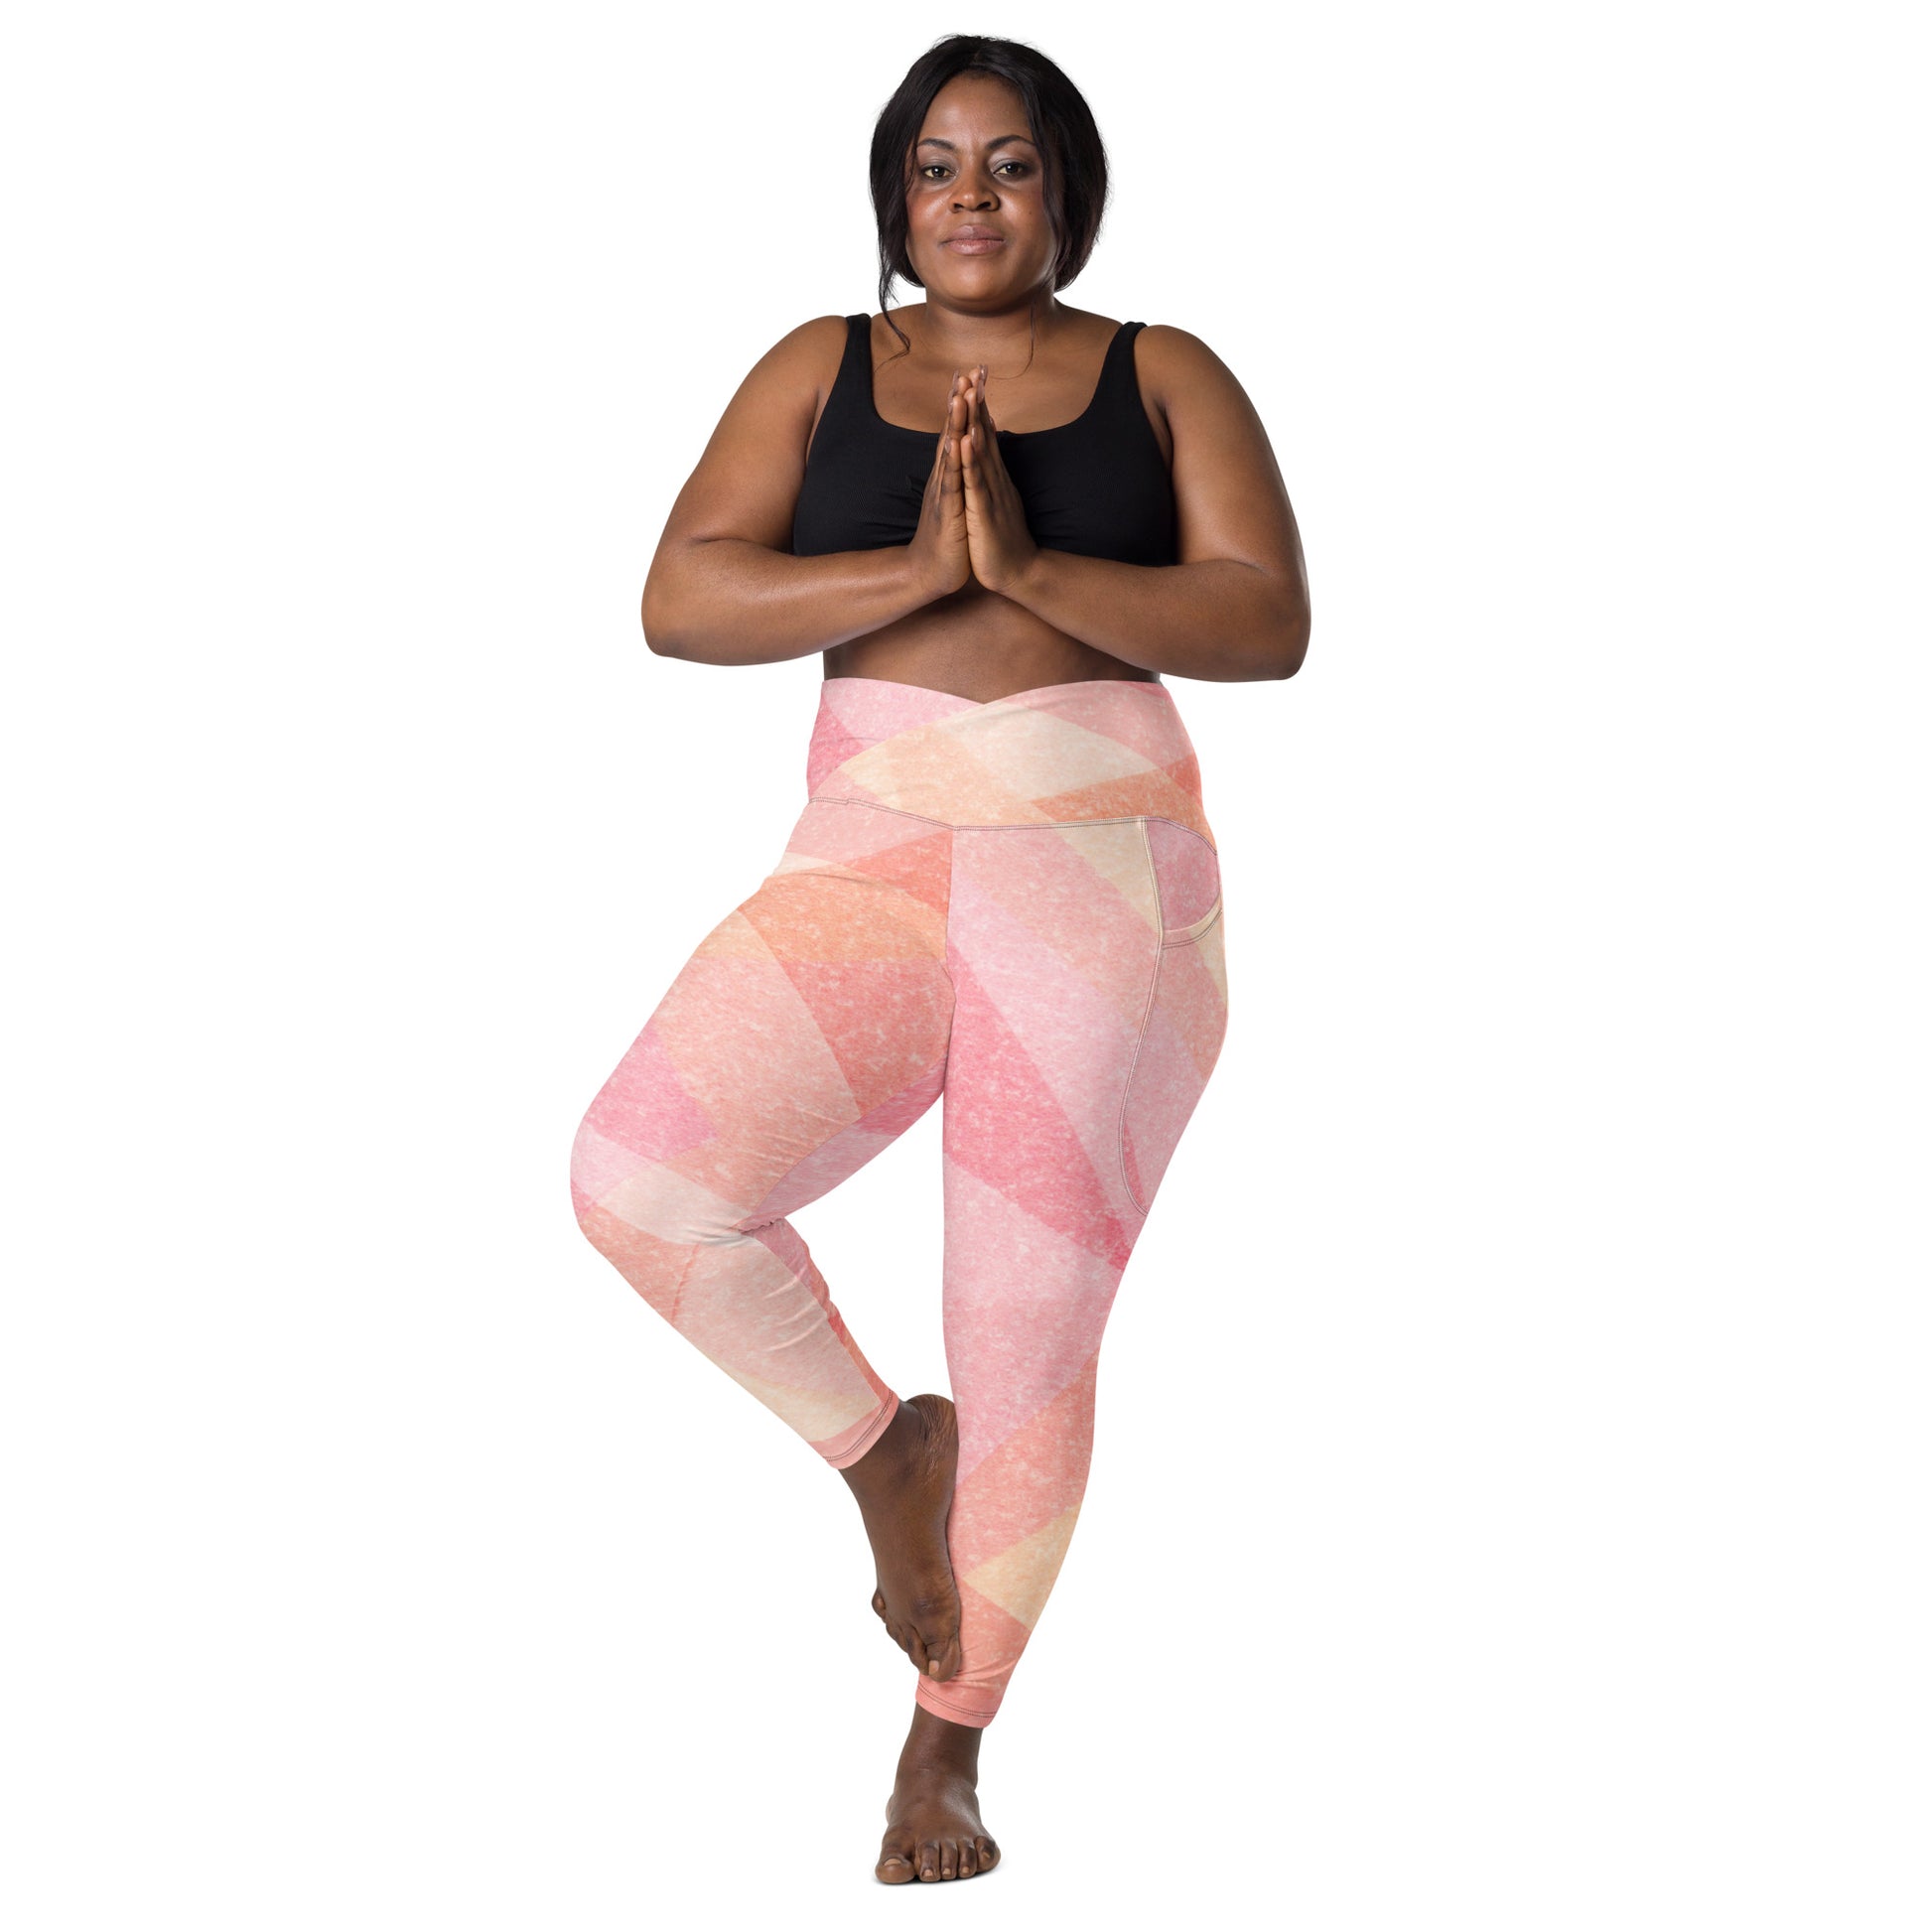  Jain ActiveFuse by Women's High-Waisted Support Leggings sold by Jain Yoga